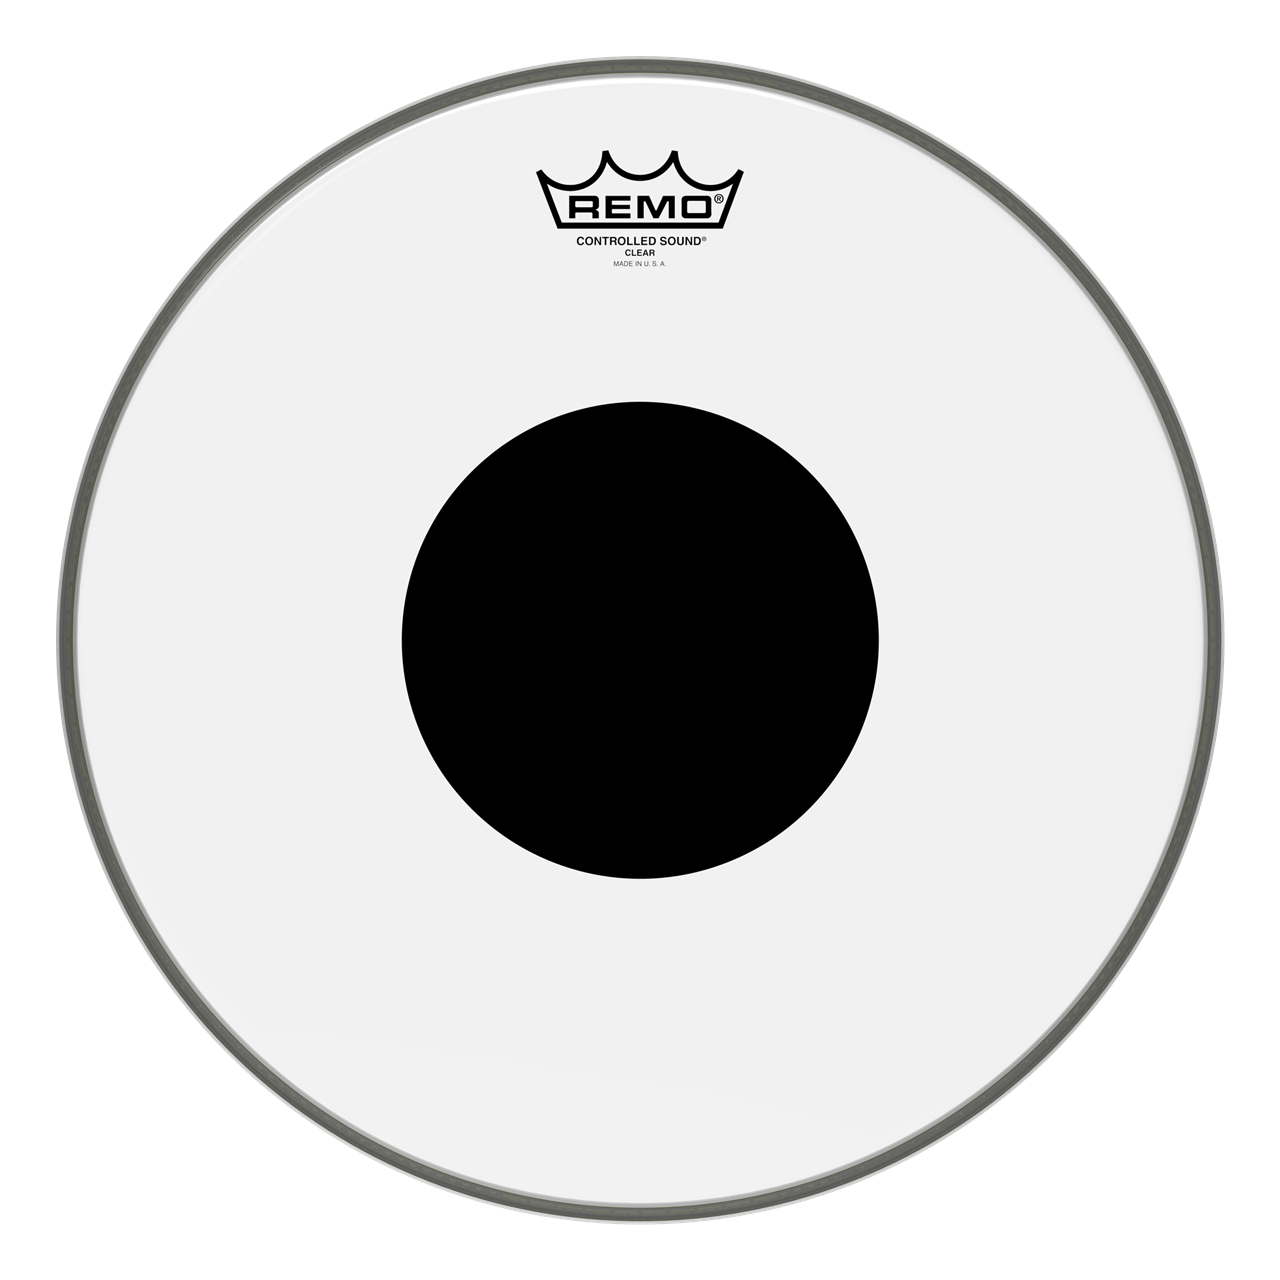 Remo CS-0308-10 Controlled Sound, 8" Clear, Black Dot